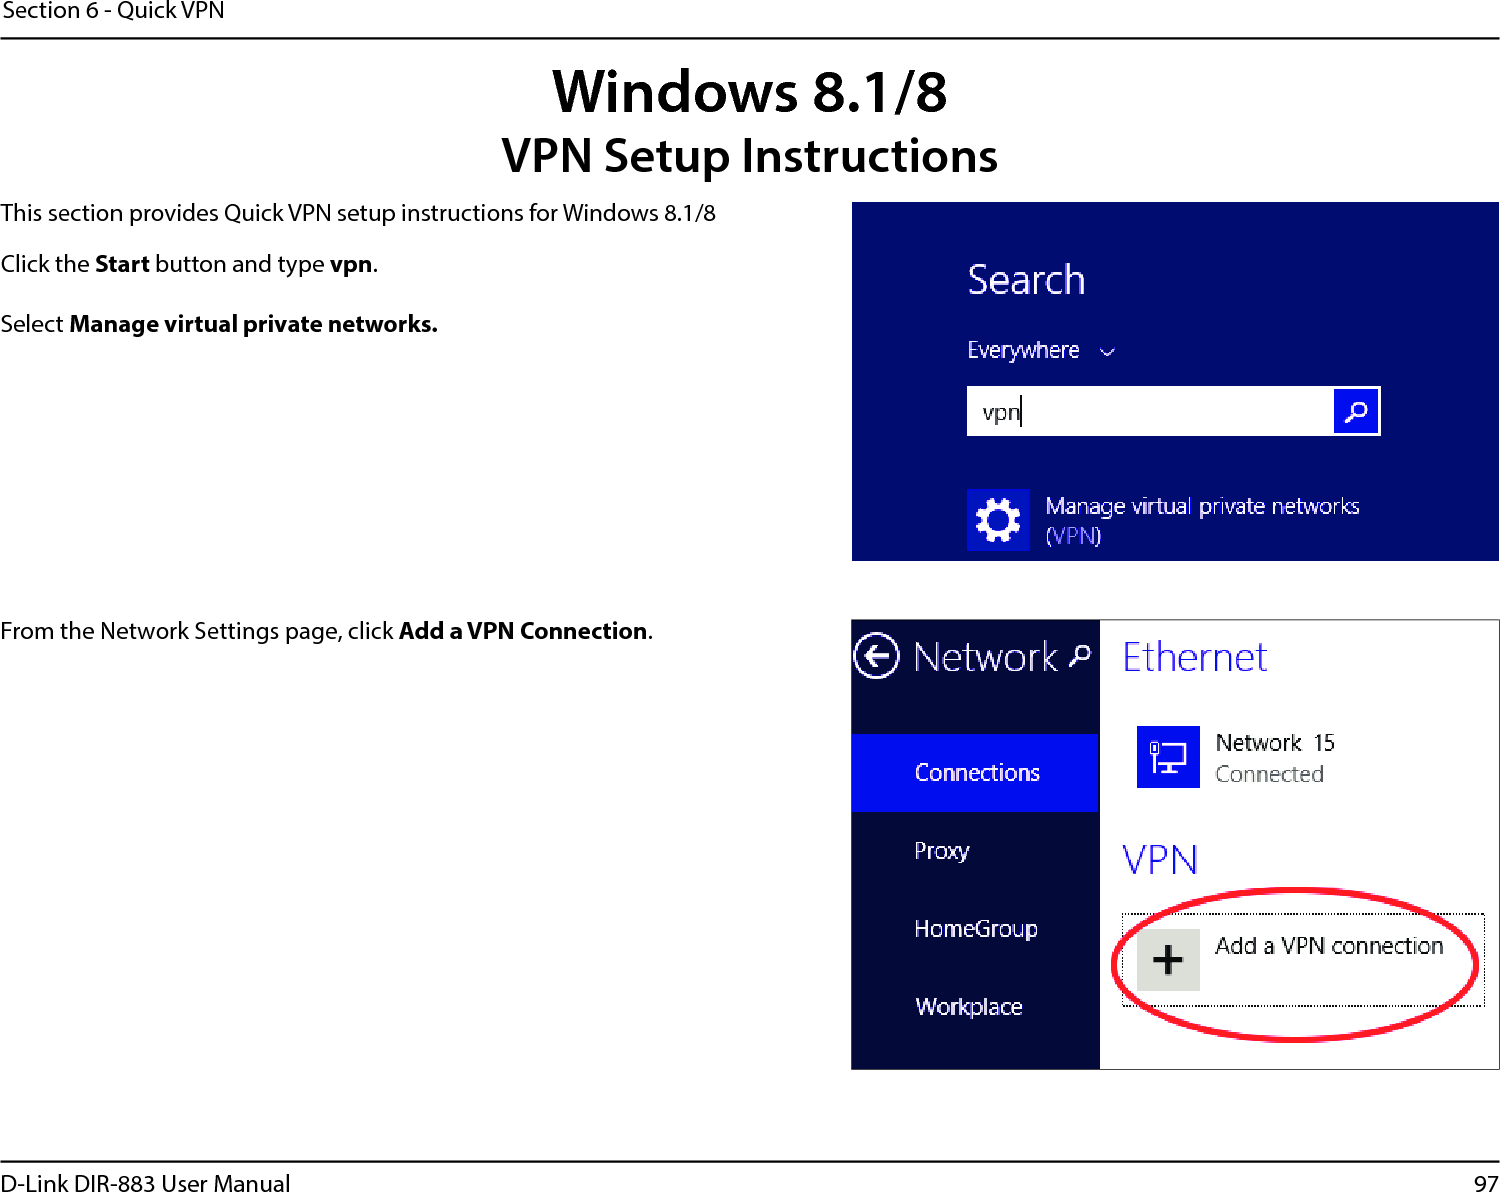 97D-Link DIR-883 User ManualSection 6 - Quick VPNWindows 8.1/8VPN Setup InstructionsThis section provides Quick VPN setup instructions for Windows 8.1/8Click the Start button and type vpn.Select Manage virtual private networks.From the Network Settings page, click Add a VPN Connection.